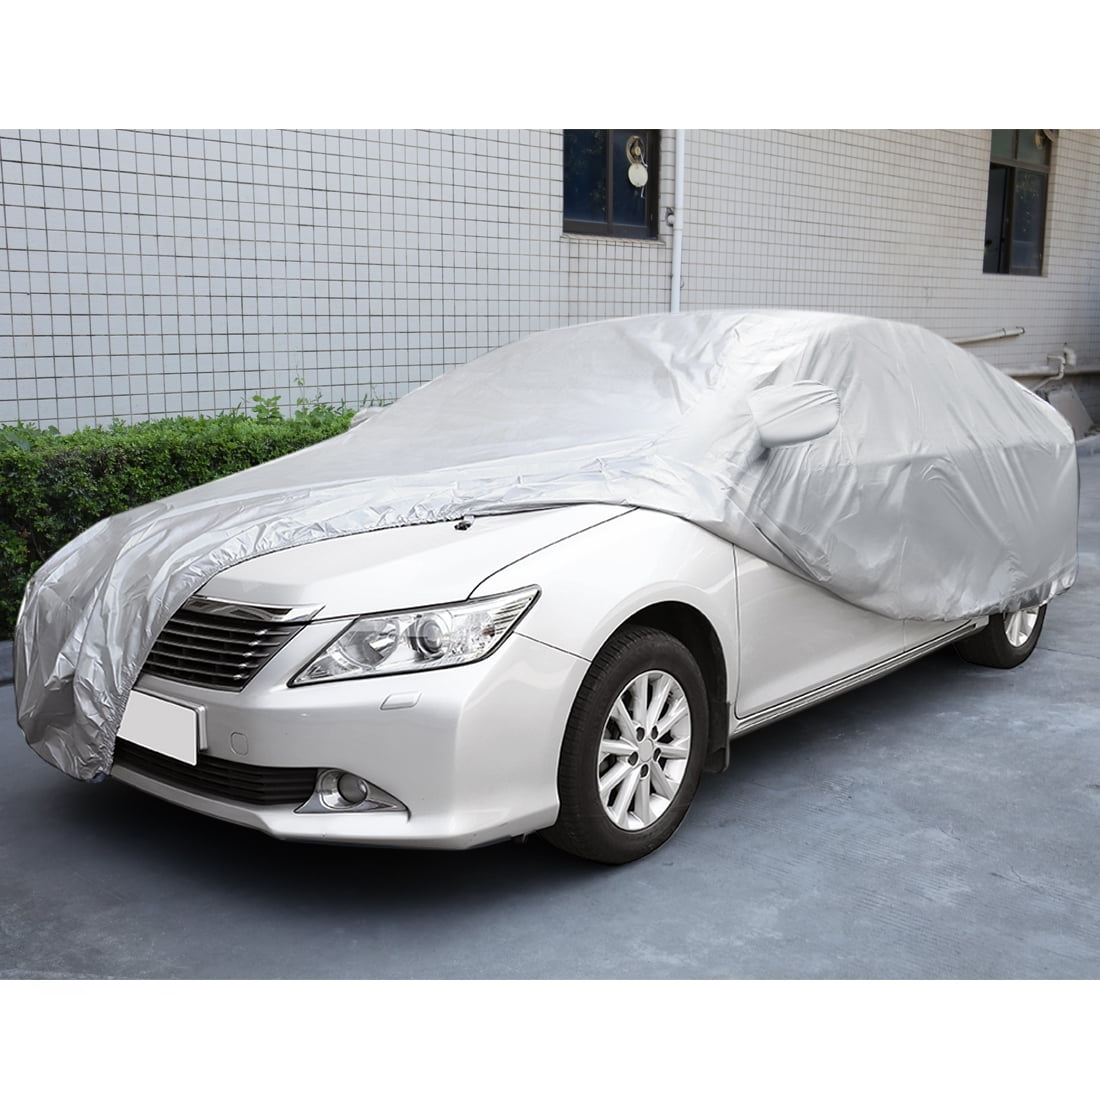 Car Top Cover to protect against Snow Dust Rain etc.Large Saloon Car Top Cover 